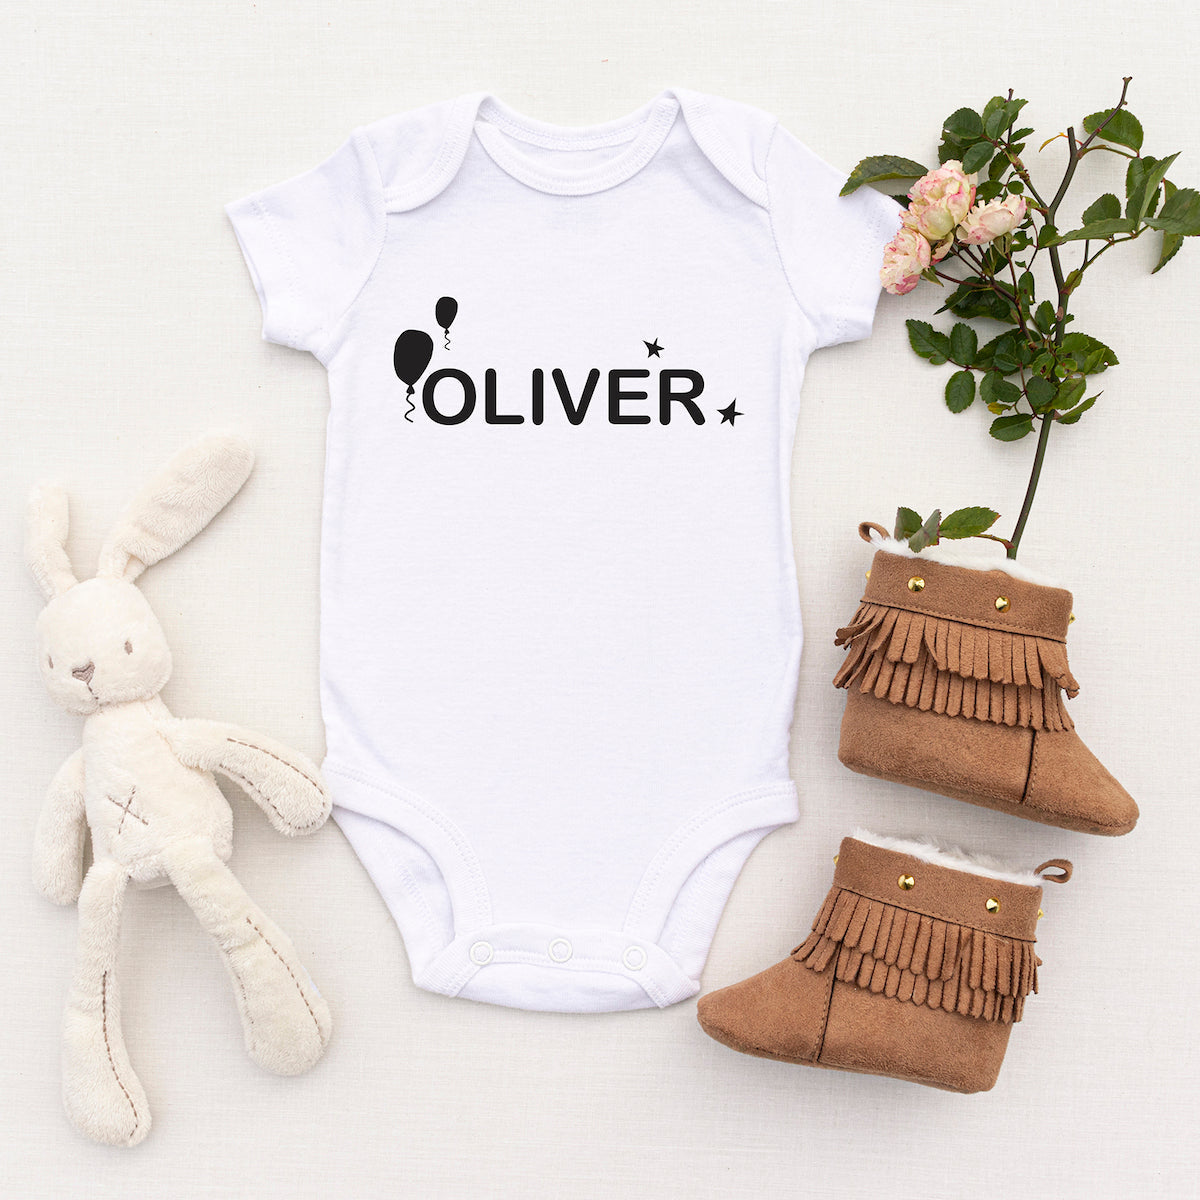 Personalised White Baby Body Suit Grow Vest - Stars - Balloons